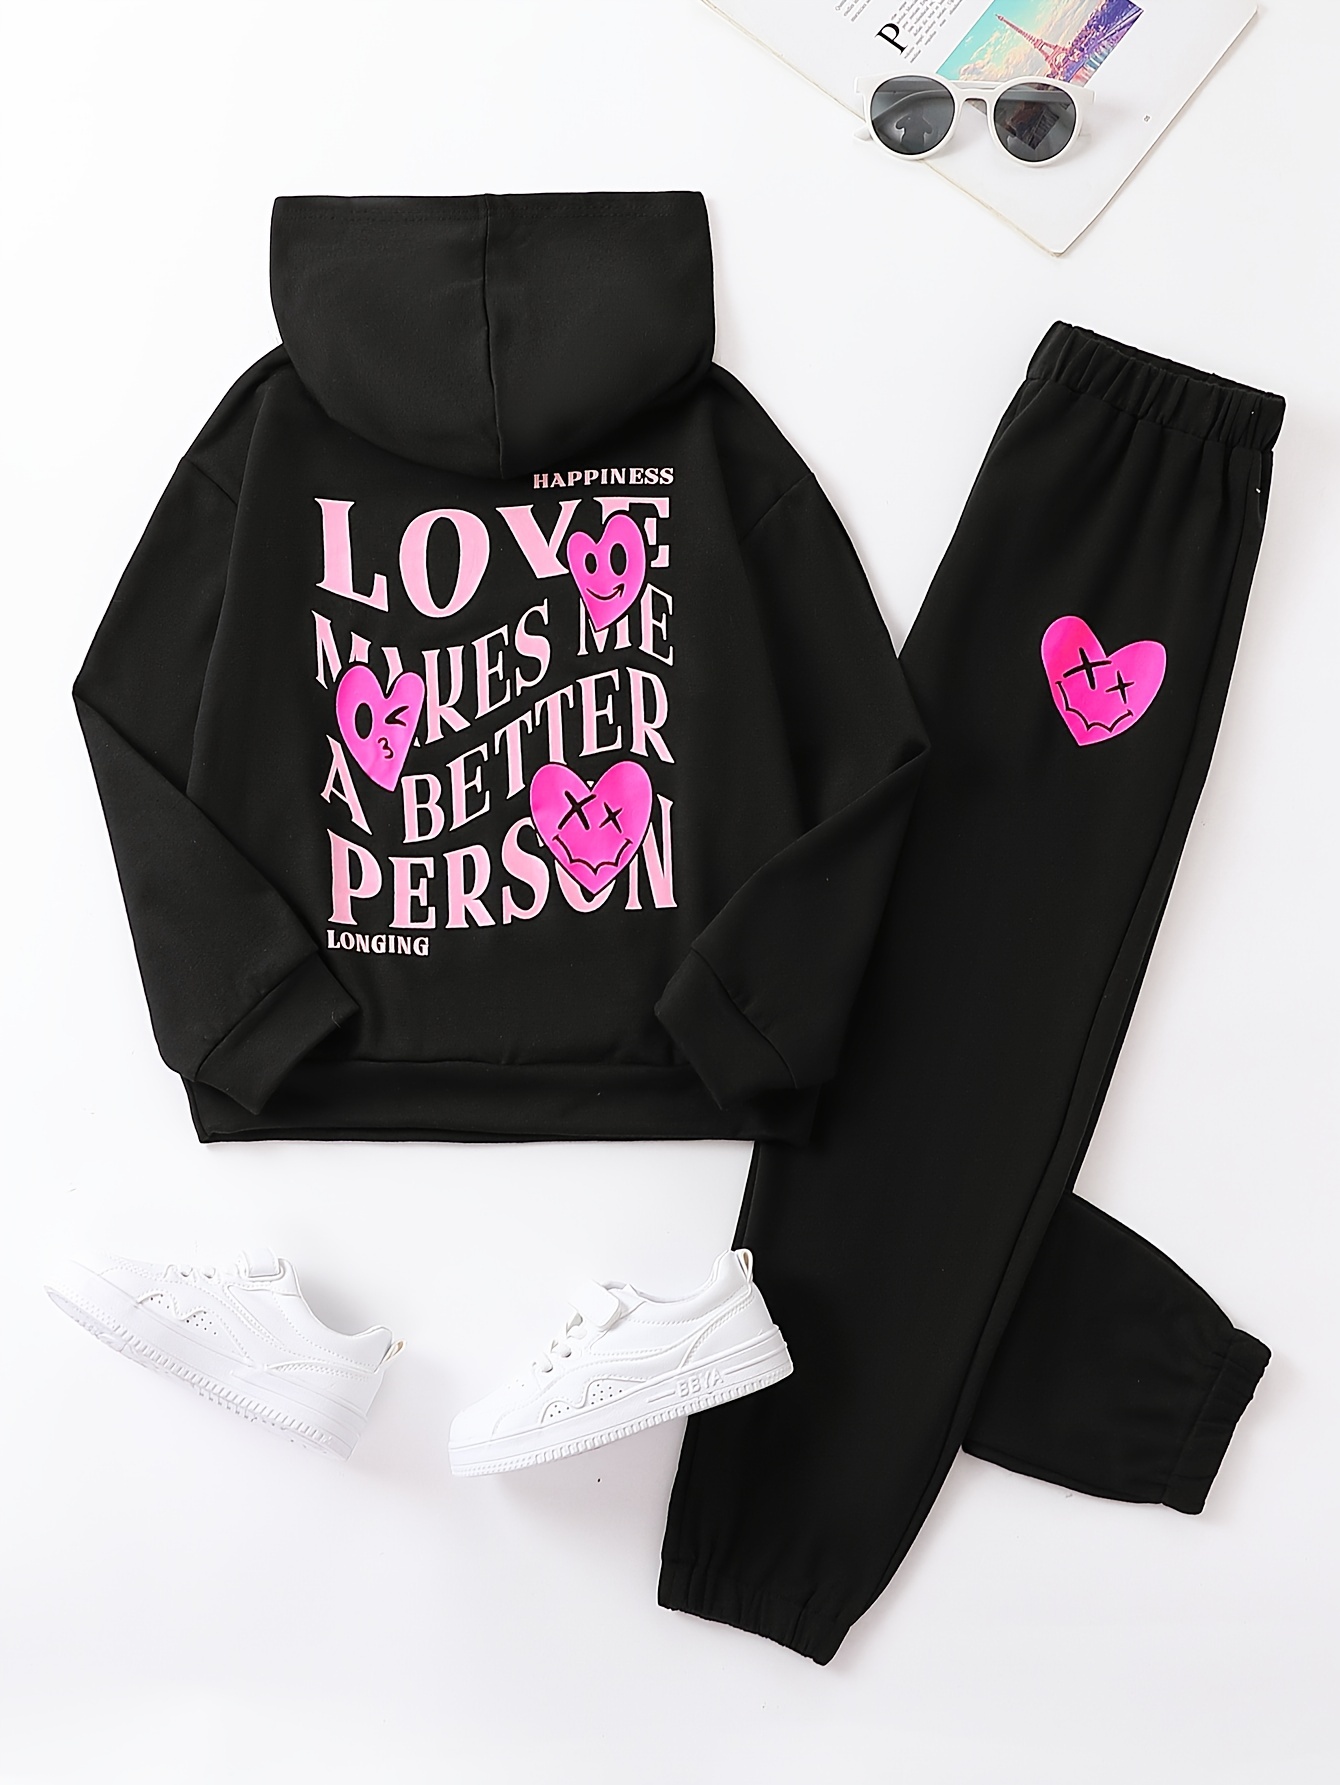 Designer Letter Print Hoodie & Sweatpants Set Unisex Long Sleeve T Shirt &  Pants For Wholesale, With 10% Discount From Lhldhgate03, $8.84